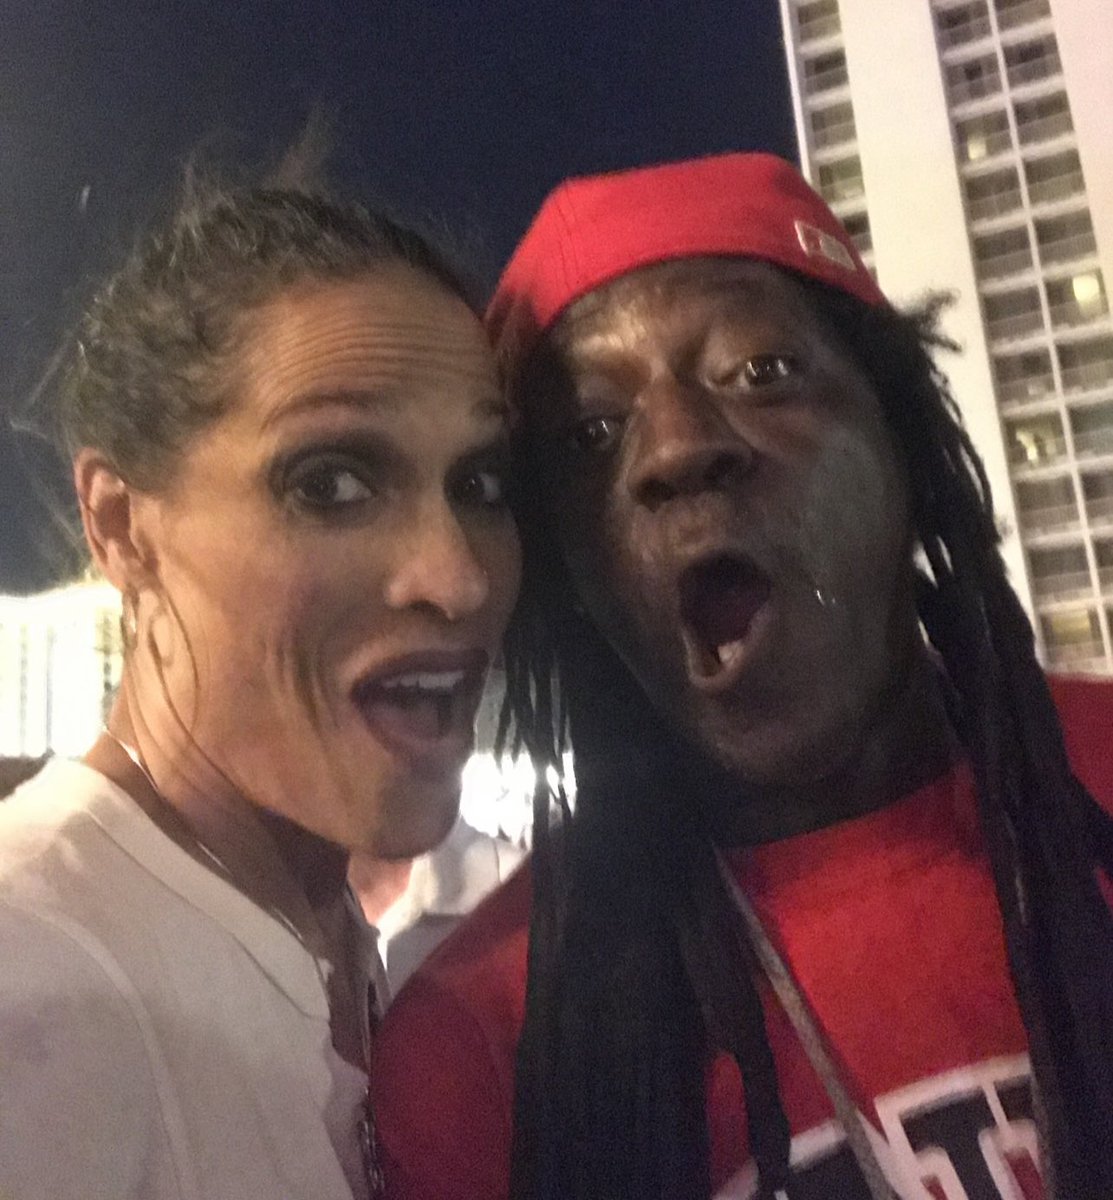 Happy Birthday to my beautiful brother & friend @FlavorFlav ! We’re so blessed to have you in our lives ! Love you, Bro!♥️